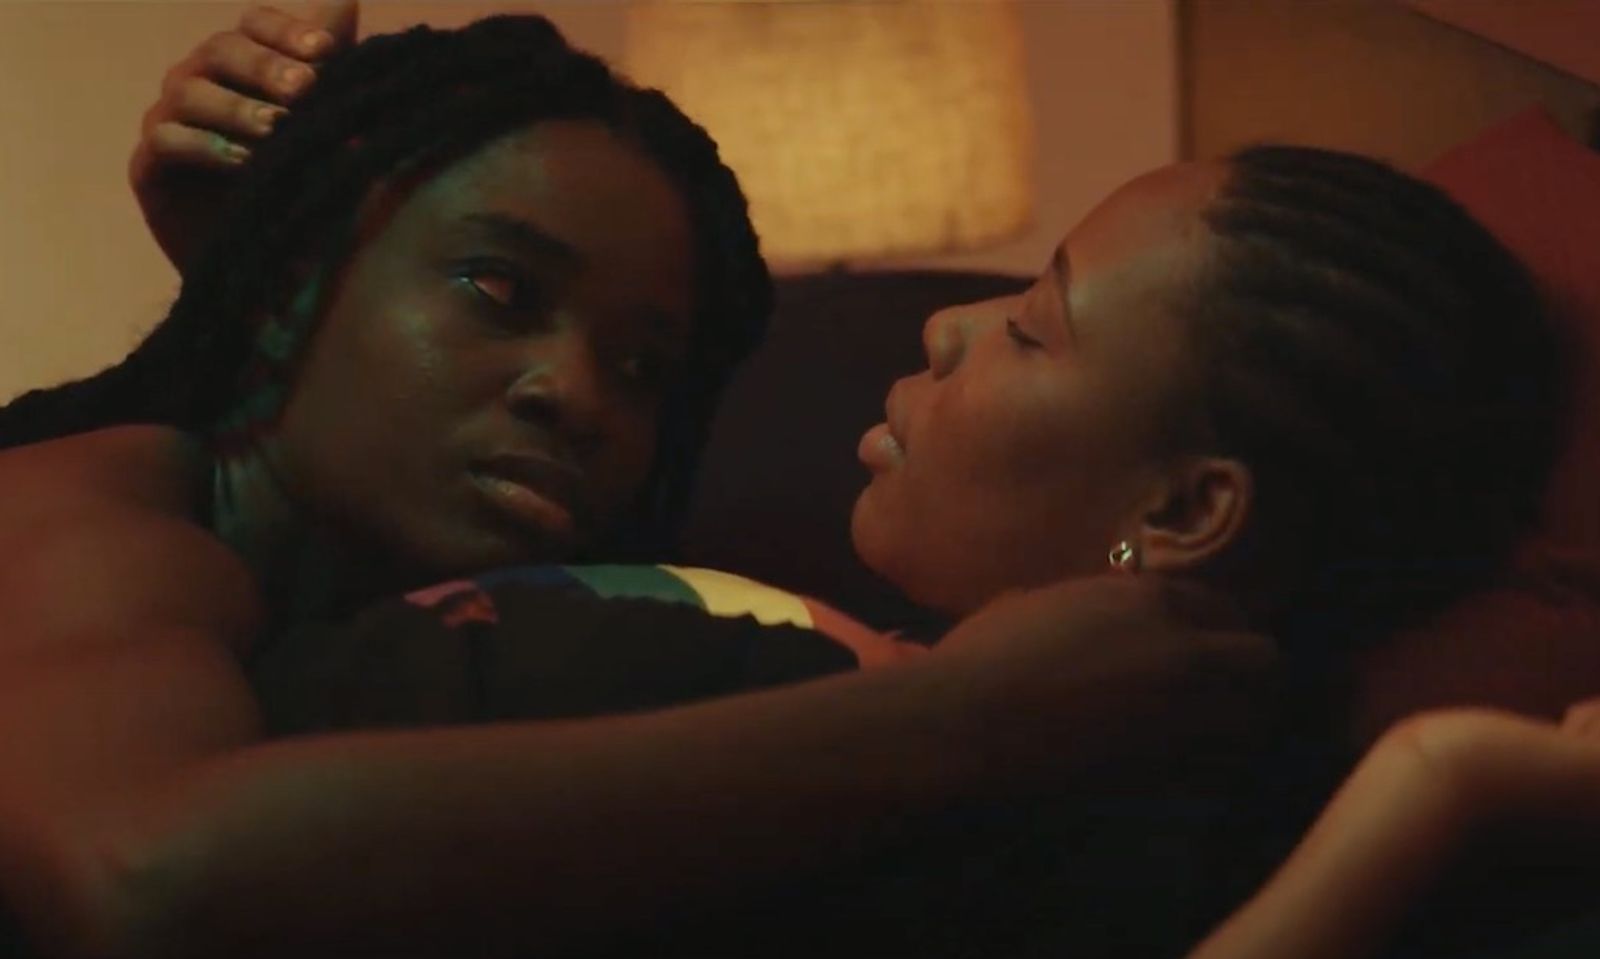 Nigeria’s First Film Showing Lesbian Love Story Faces Censorship